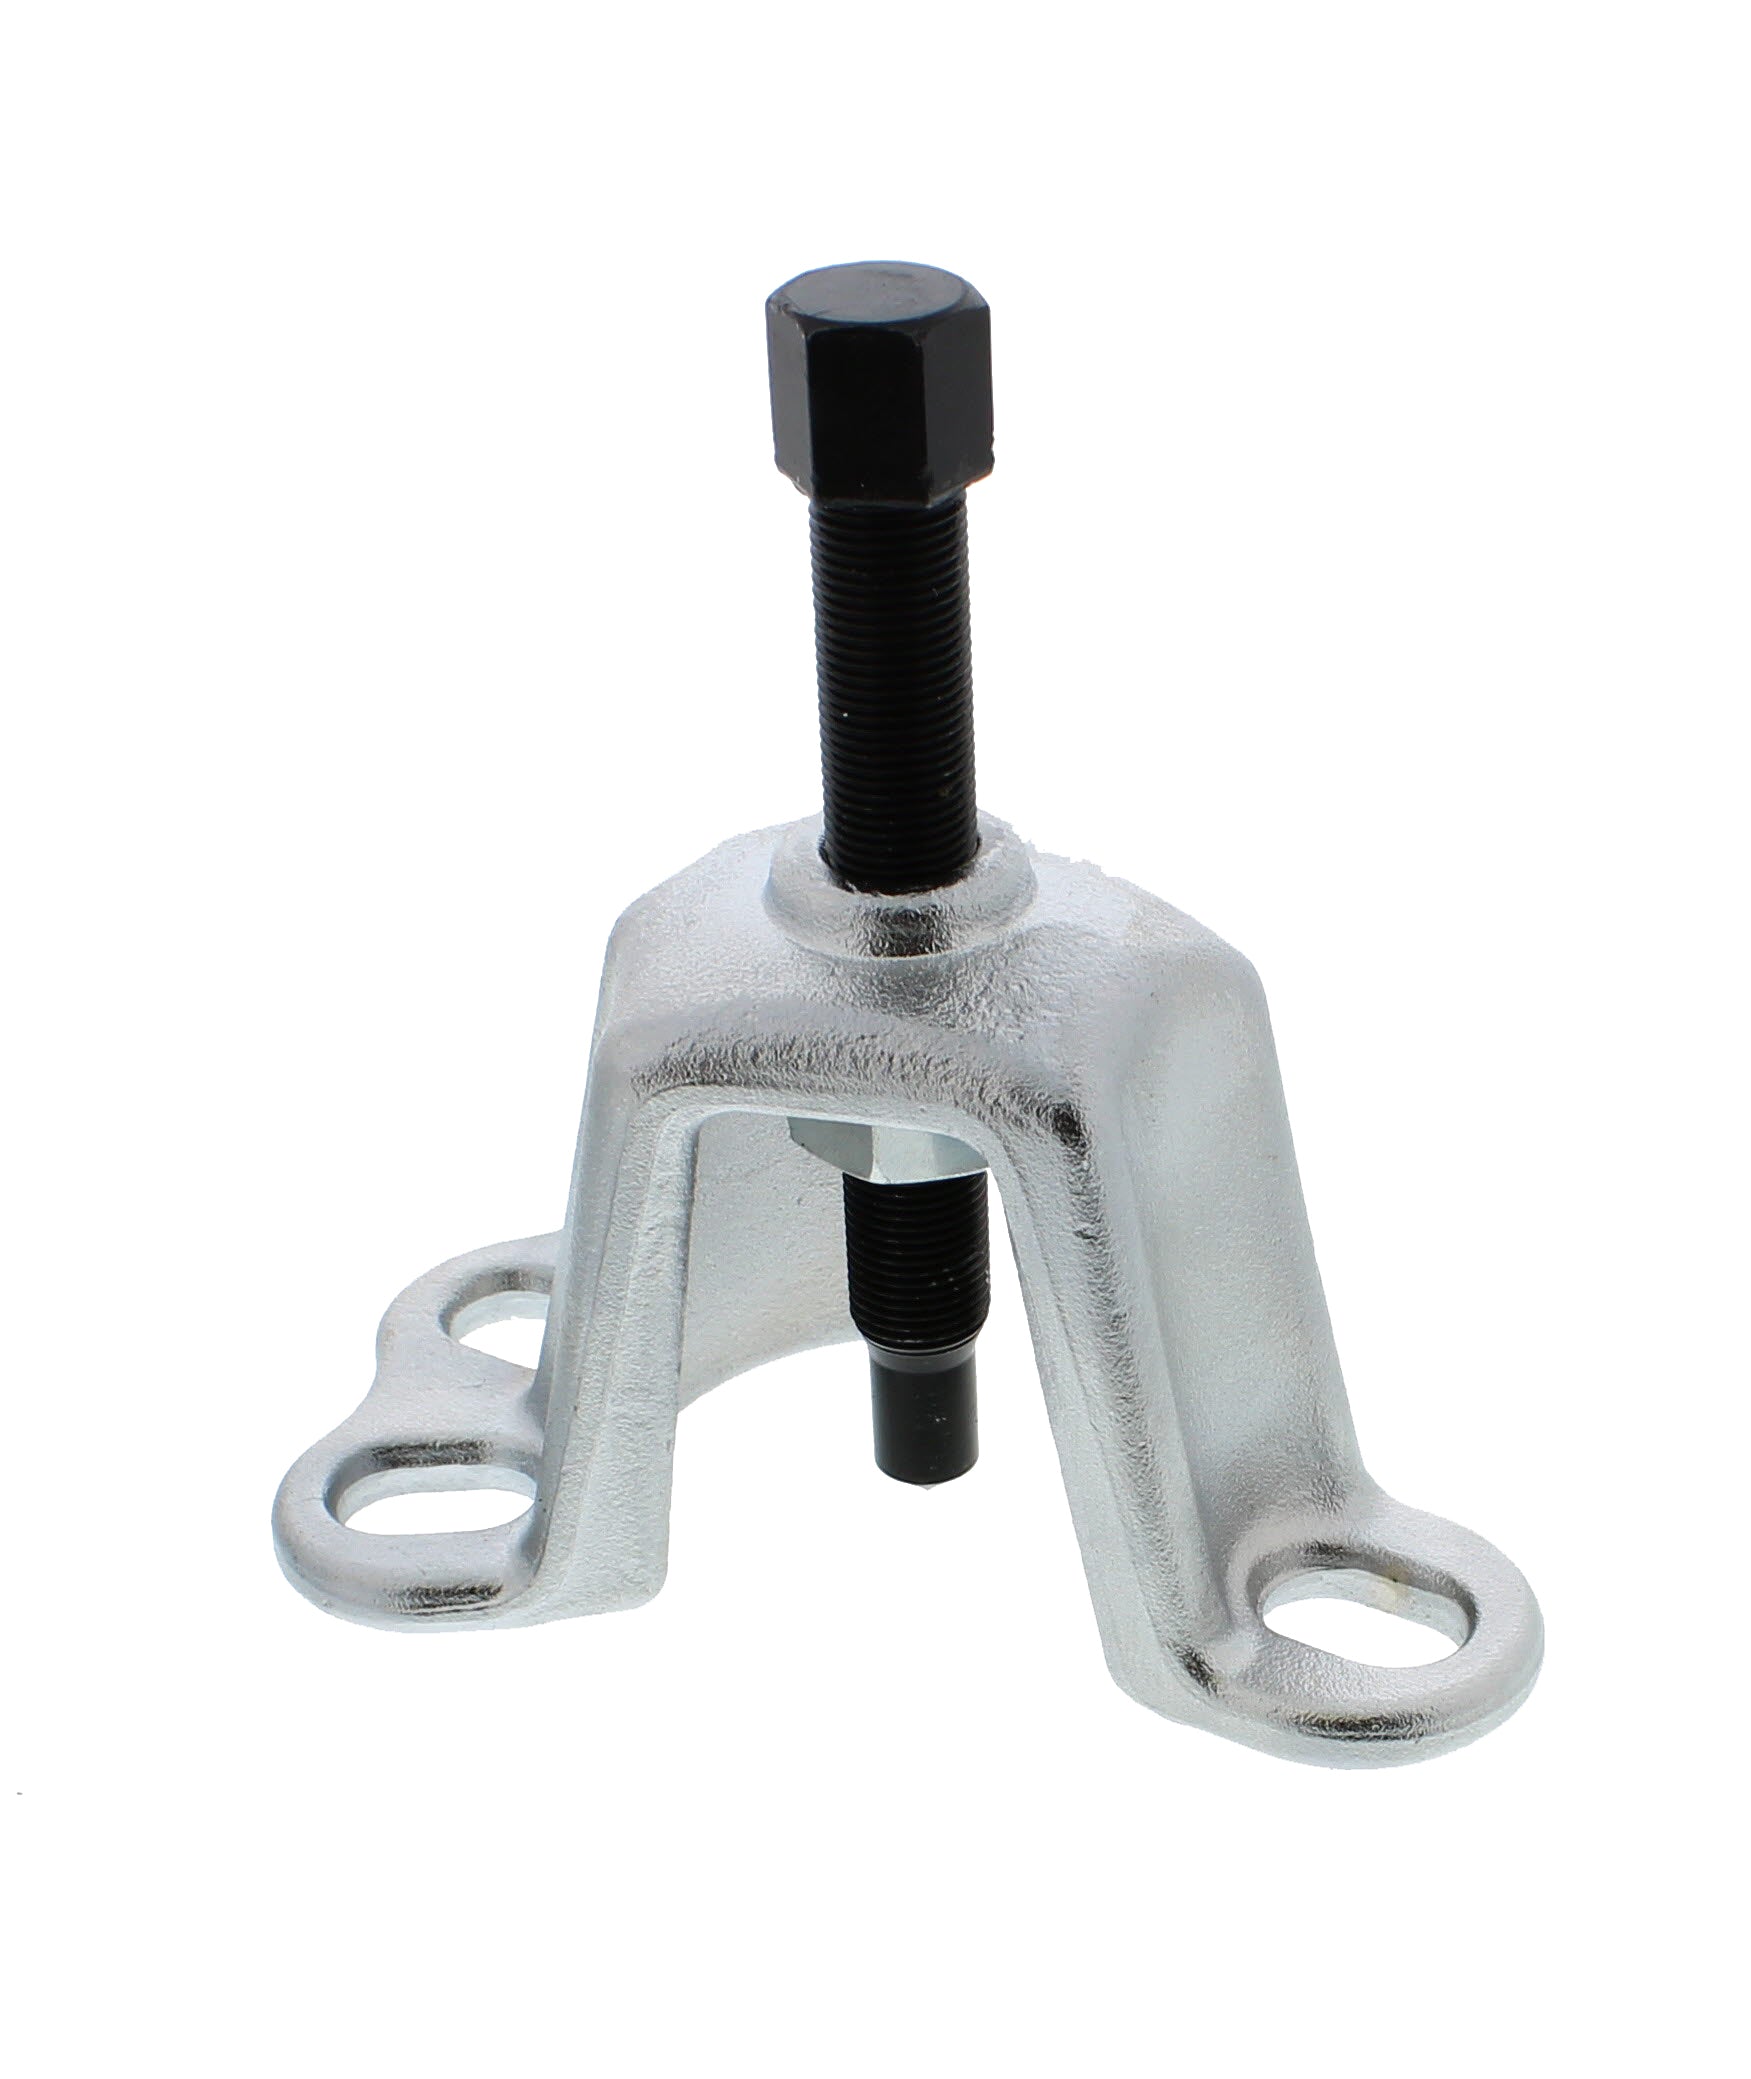 Axle Remover and Front Wheel Hub Puller Hub Grappler Tool